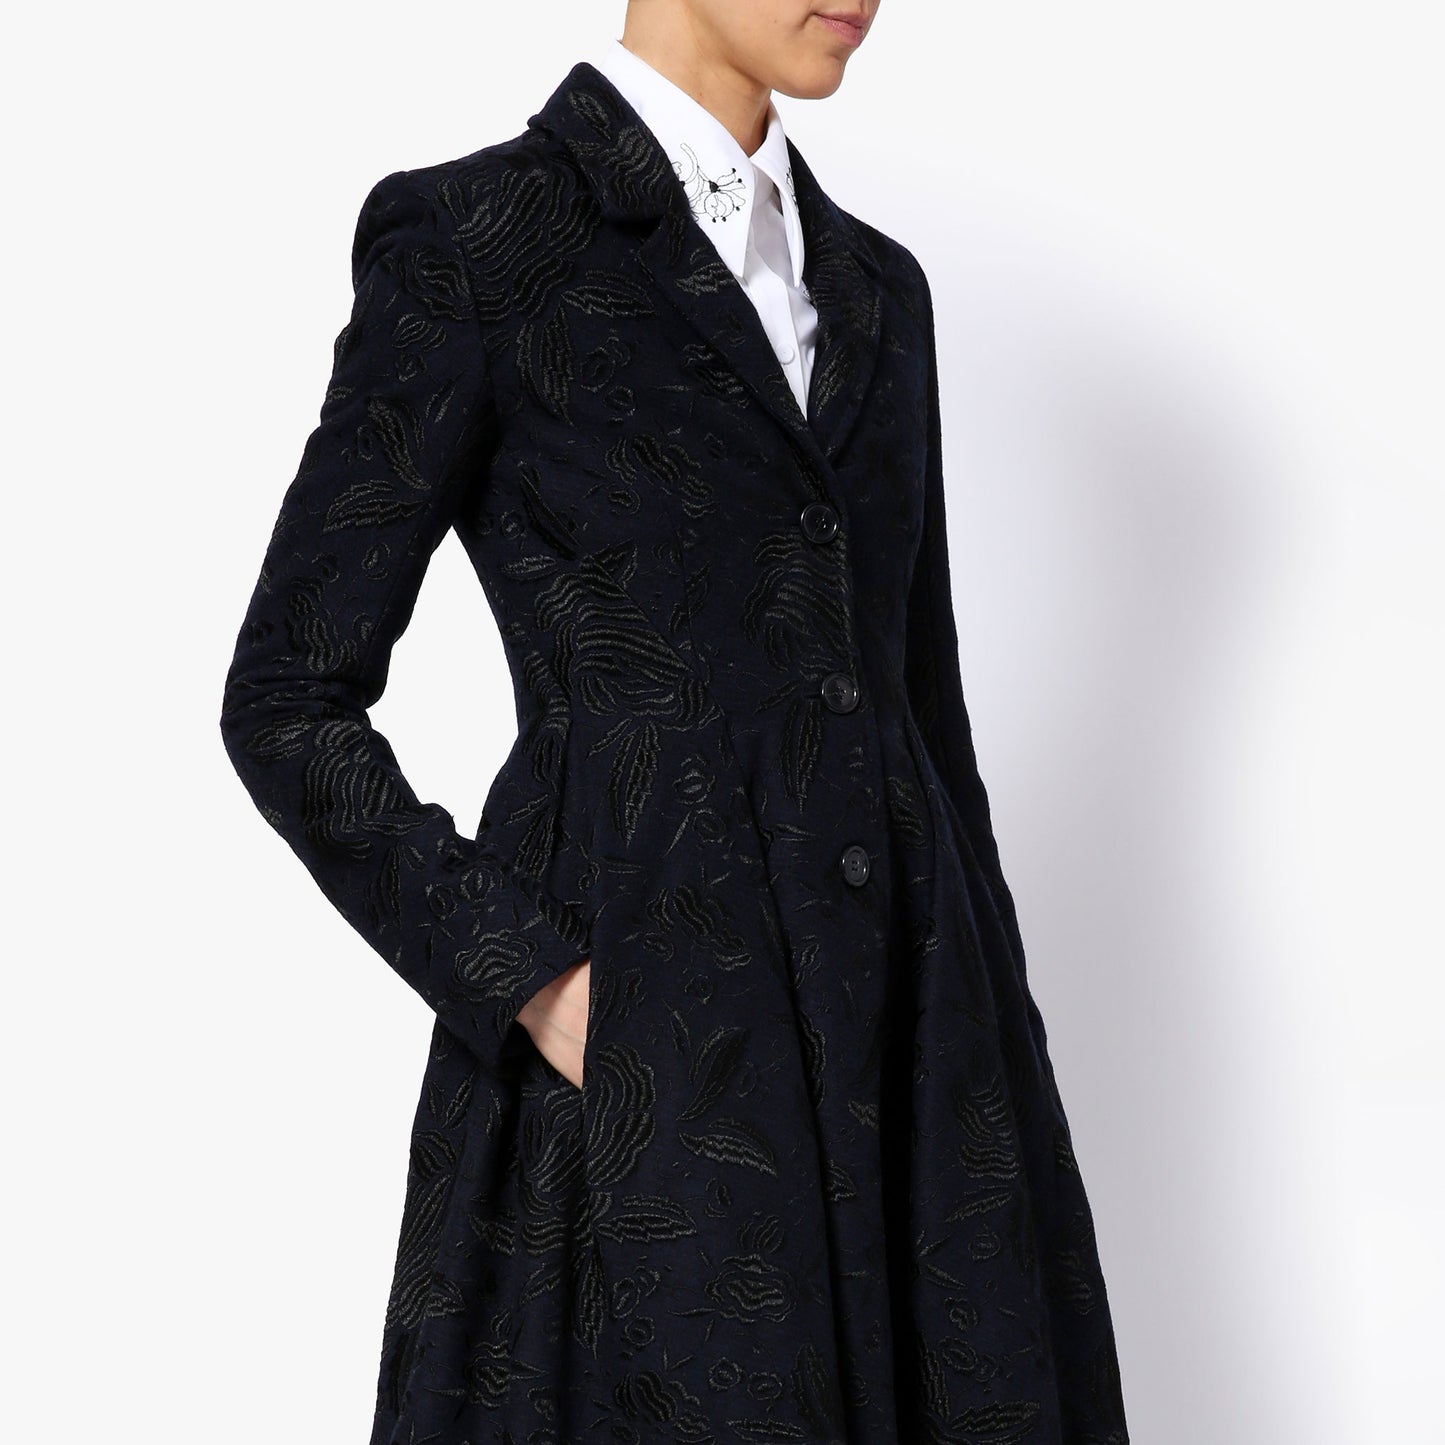 Stephanie Embroidered Coat